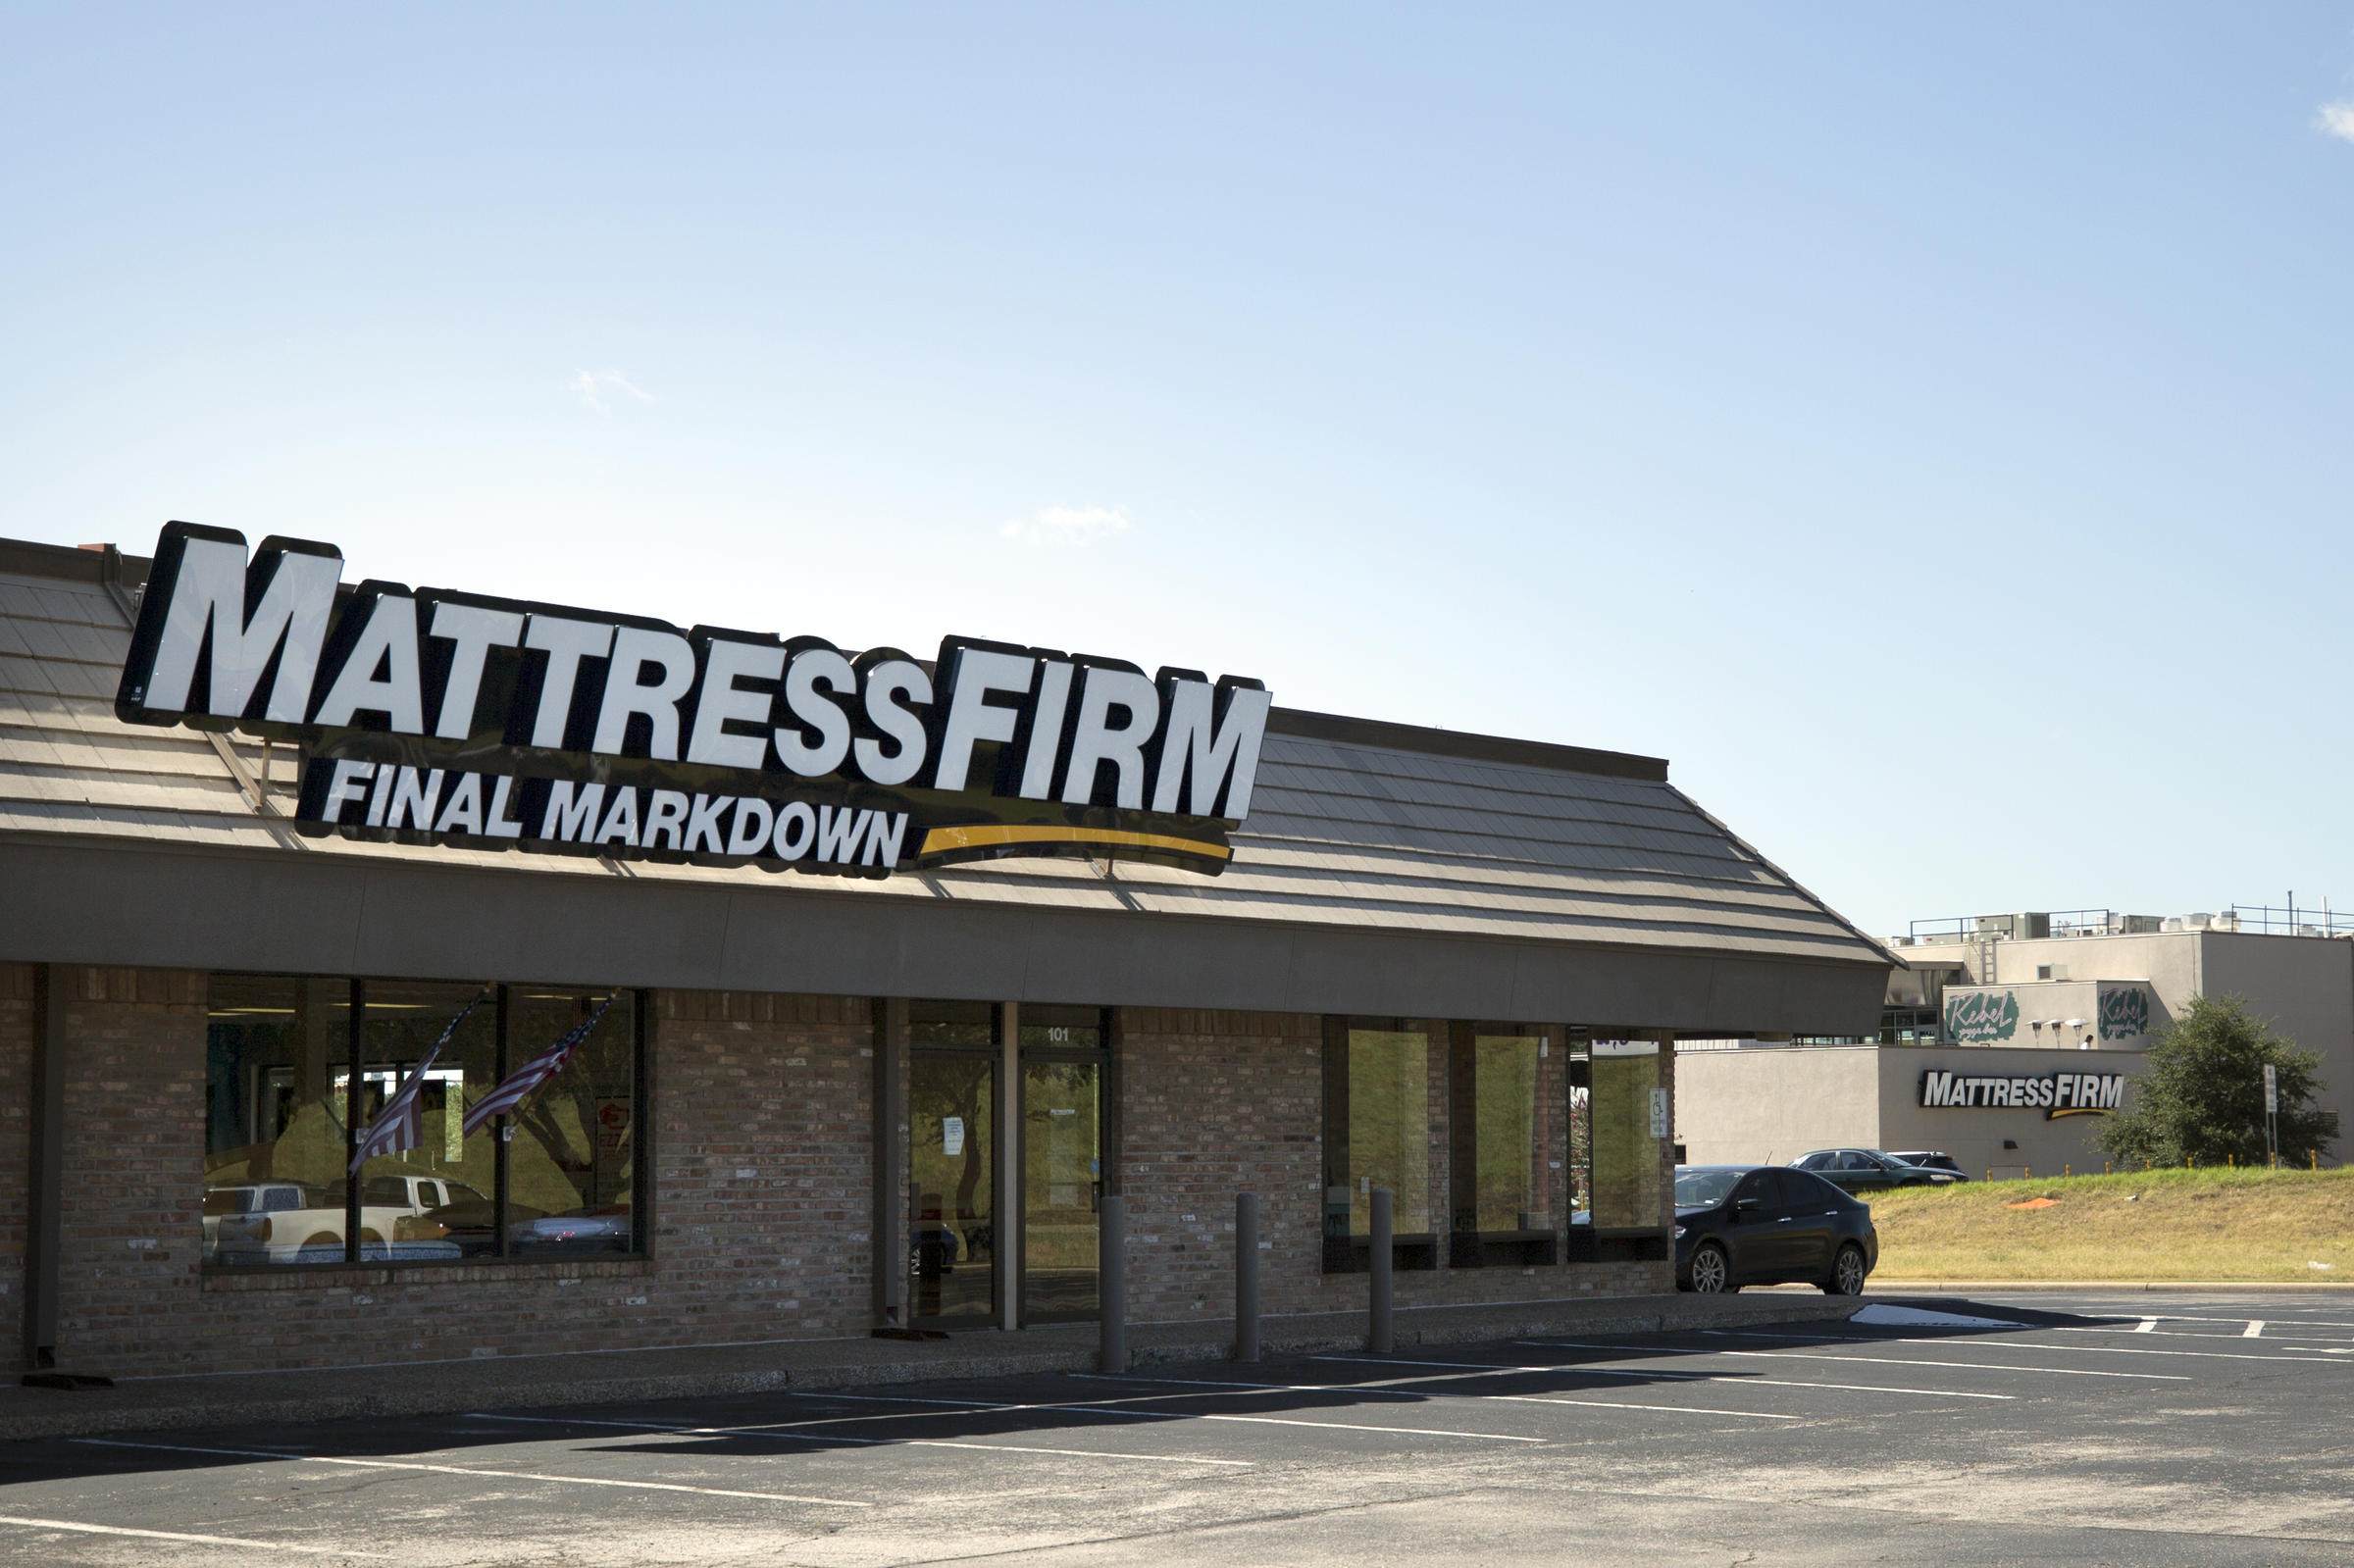 Why Are There So Many Mattress Stores In Austin?